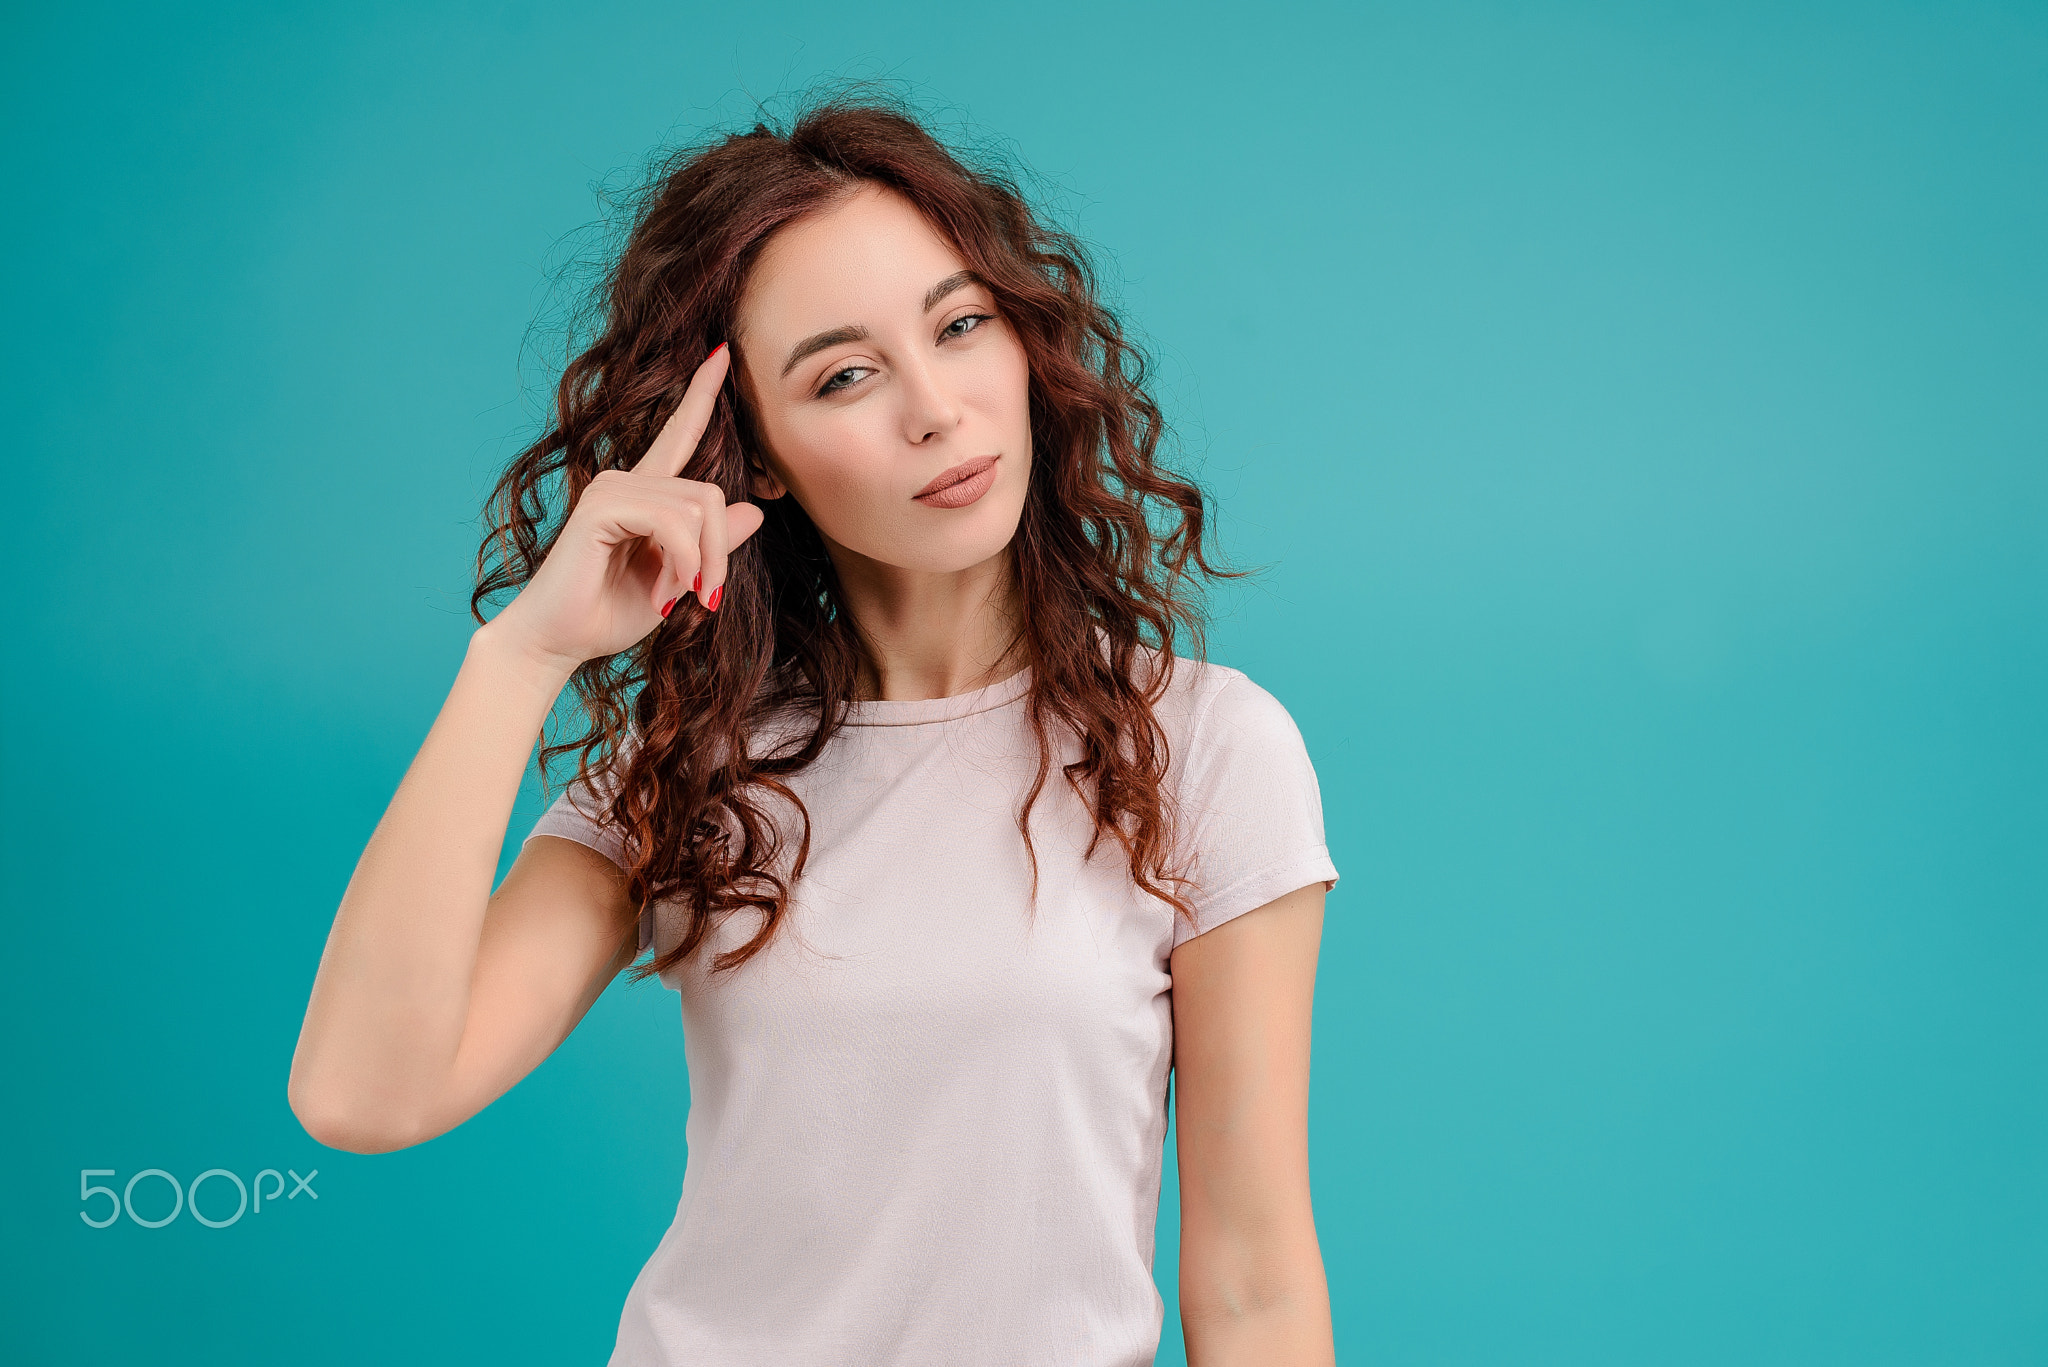 Young woman with curly hair isolated over bright colorful background